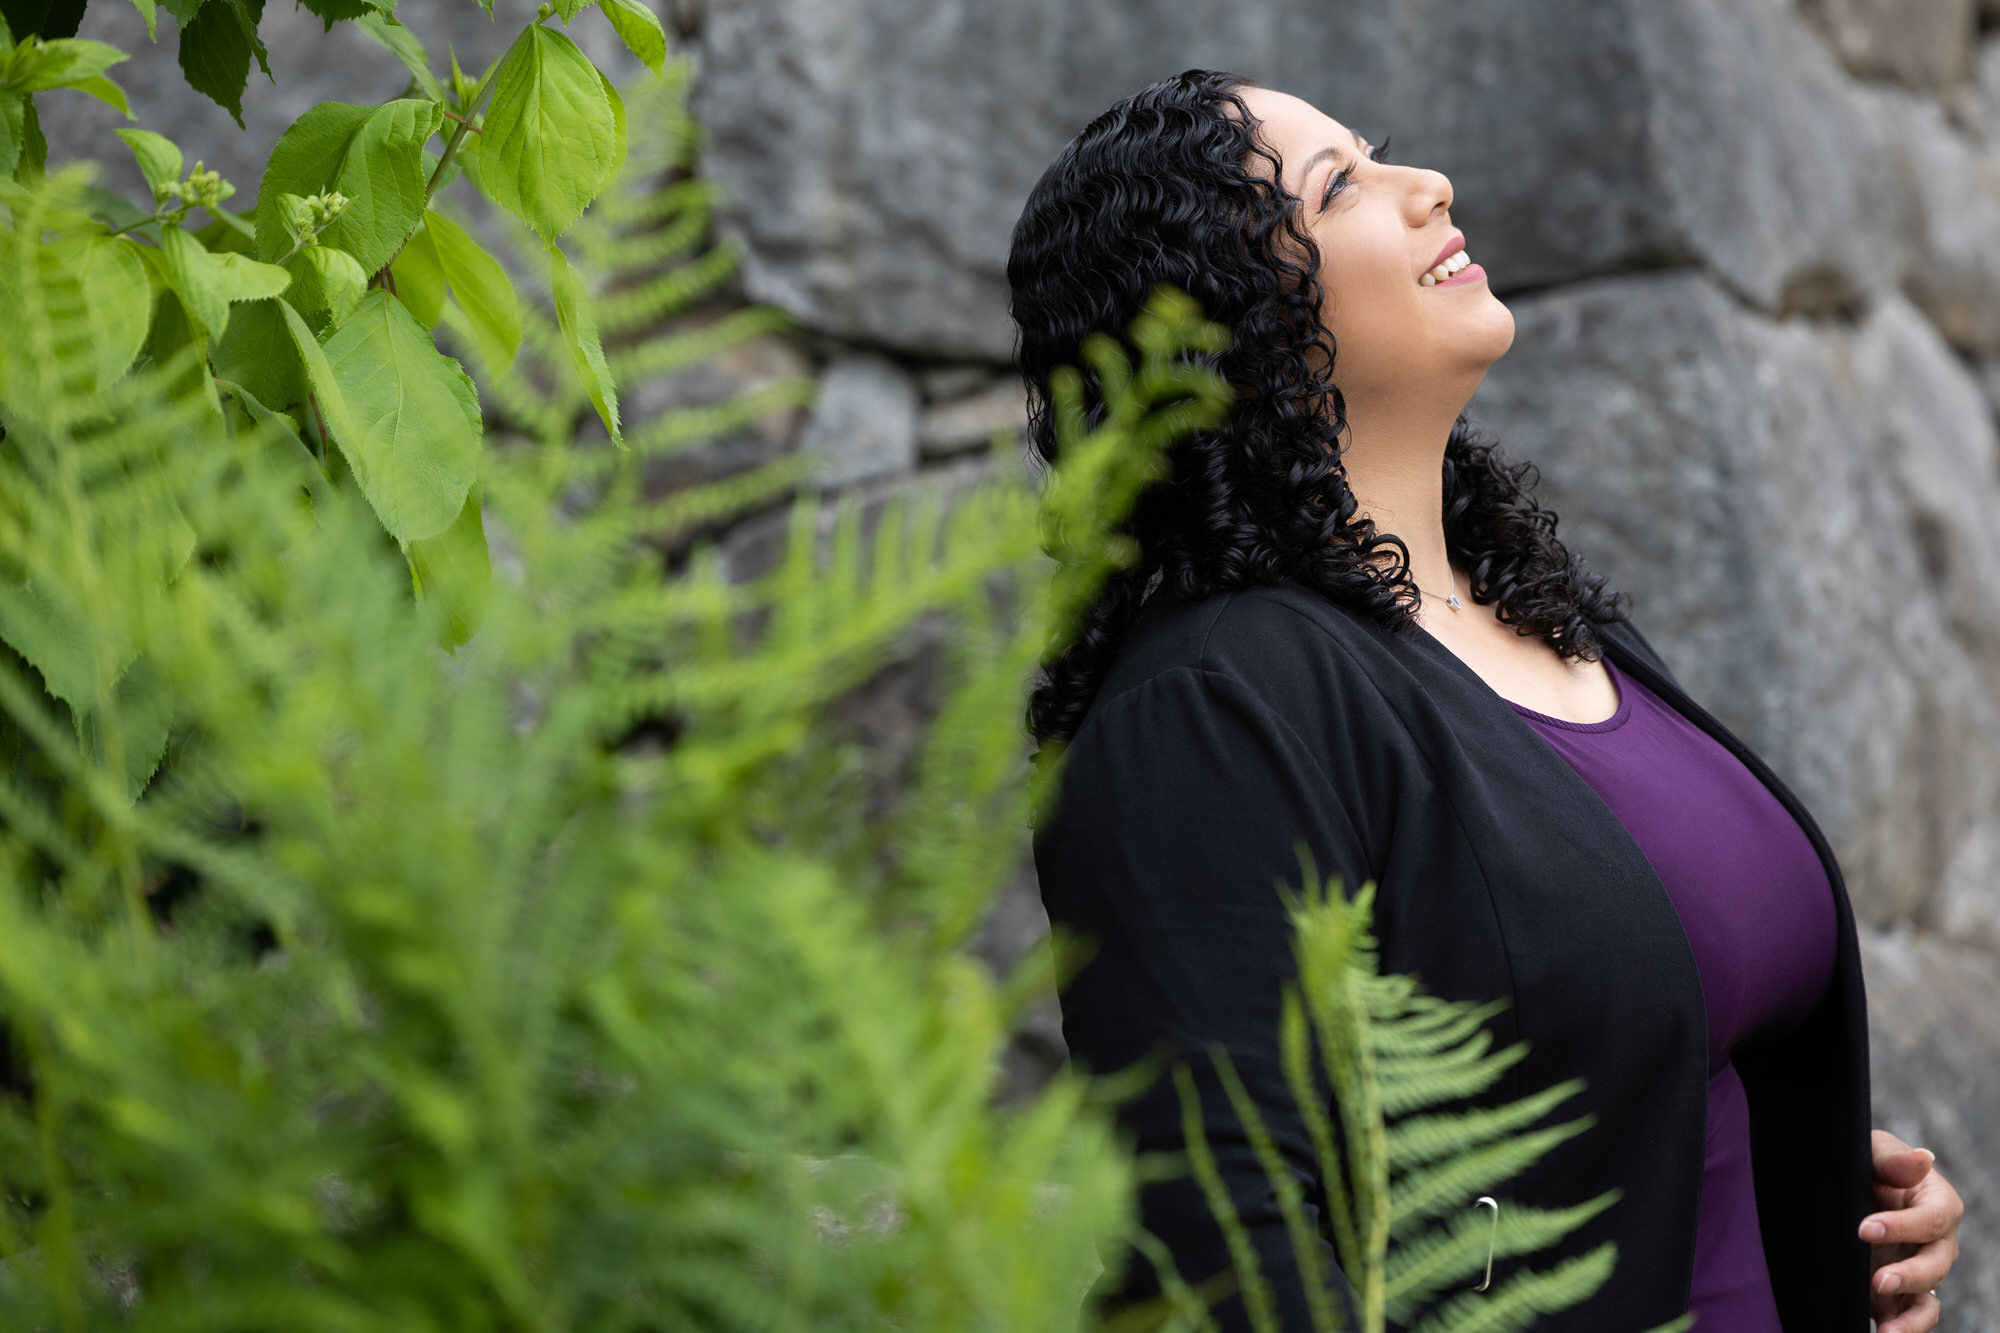 Empowered Voices member wearing royal purple top and black cardigan smiles and looks skyward, leaning against gray stone wall near green fern foliage.